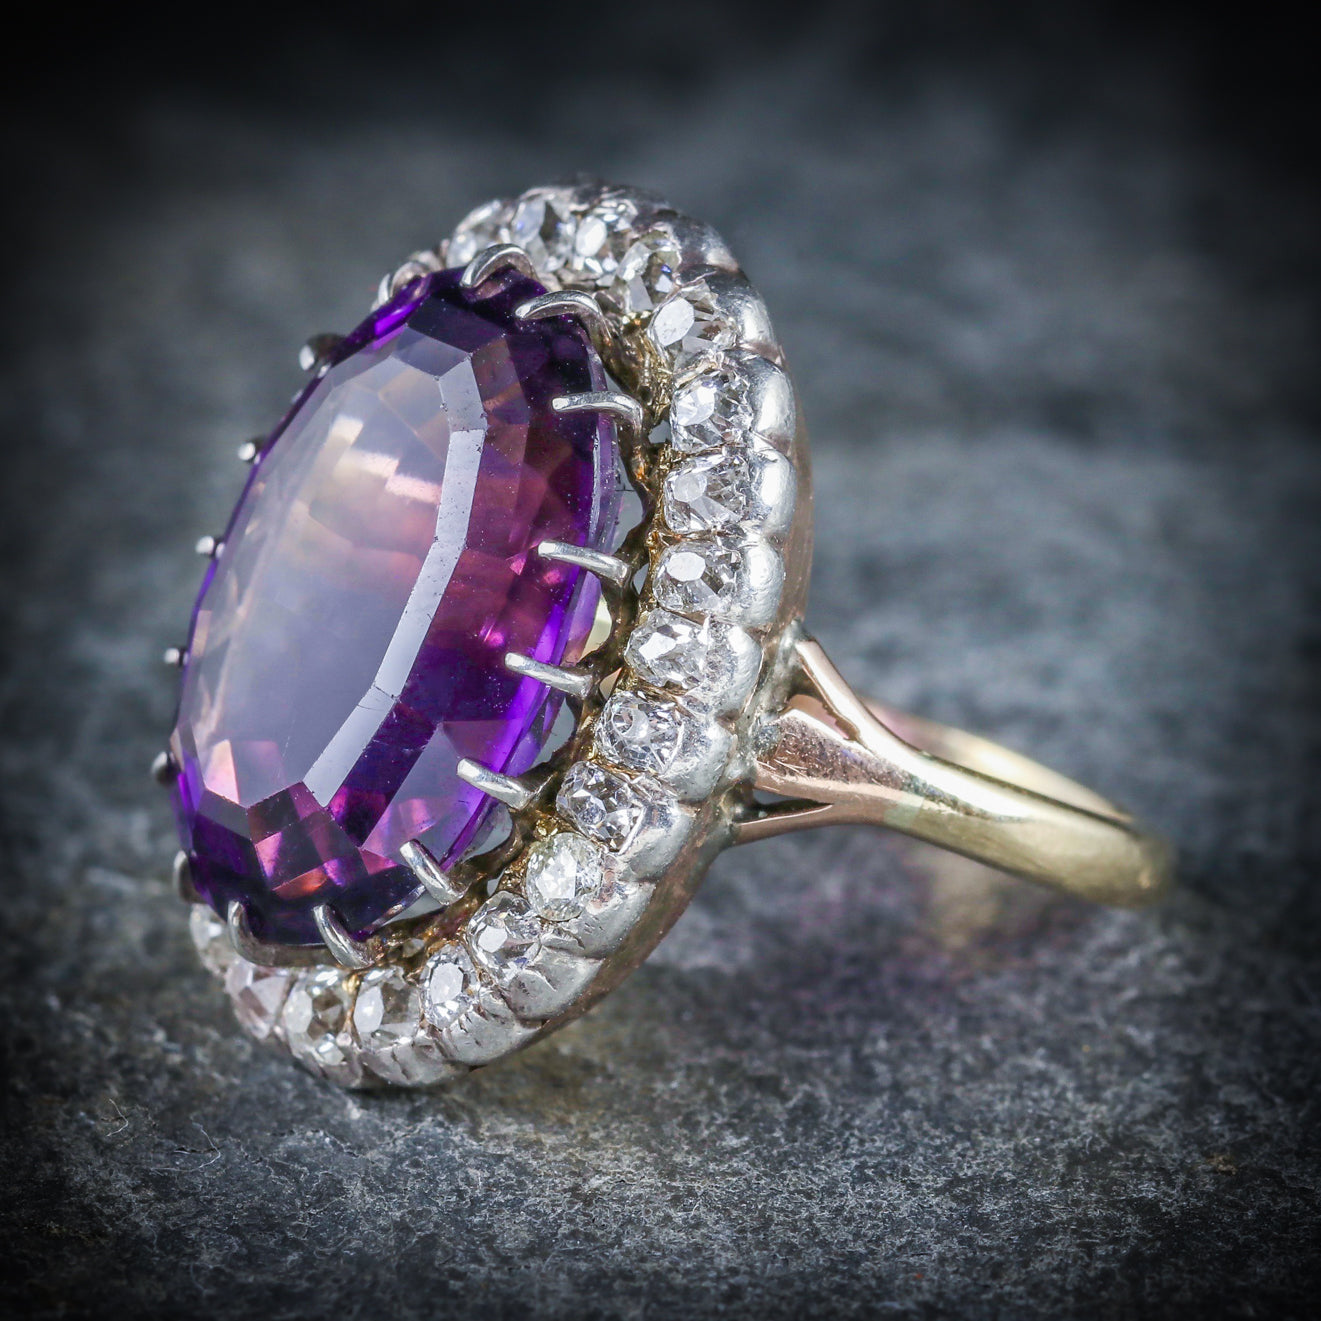 Antique Victorian Amethyst Ring 9ct Gold Circa 1900 Antique Jewellery